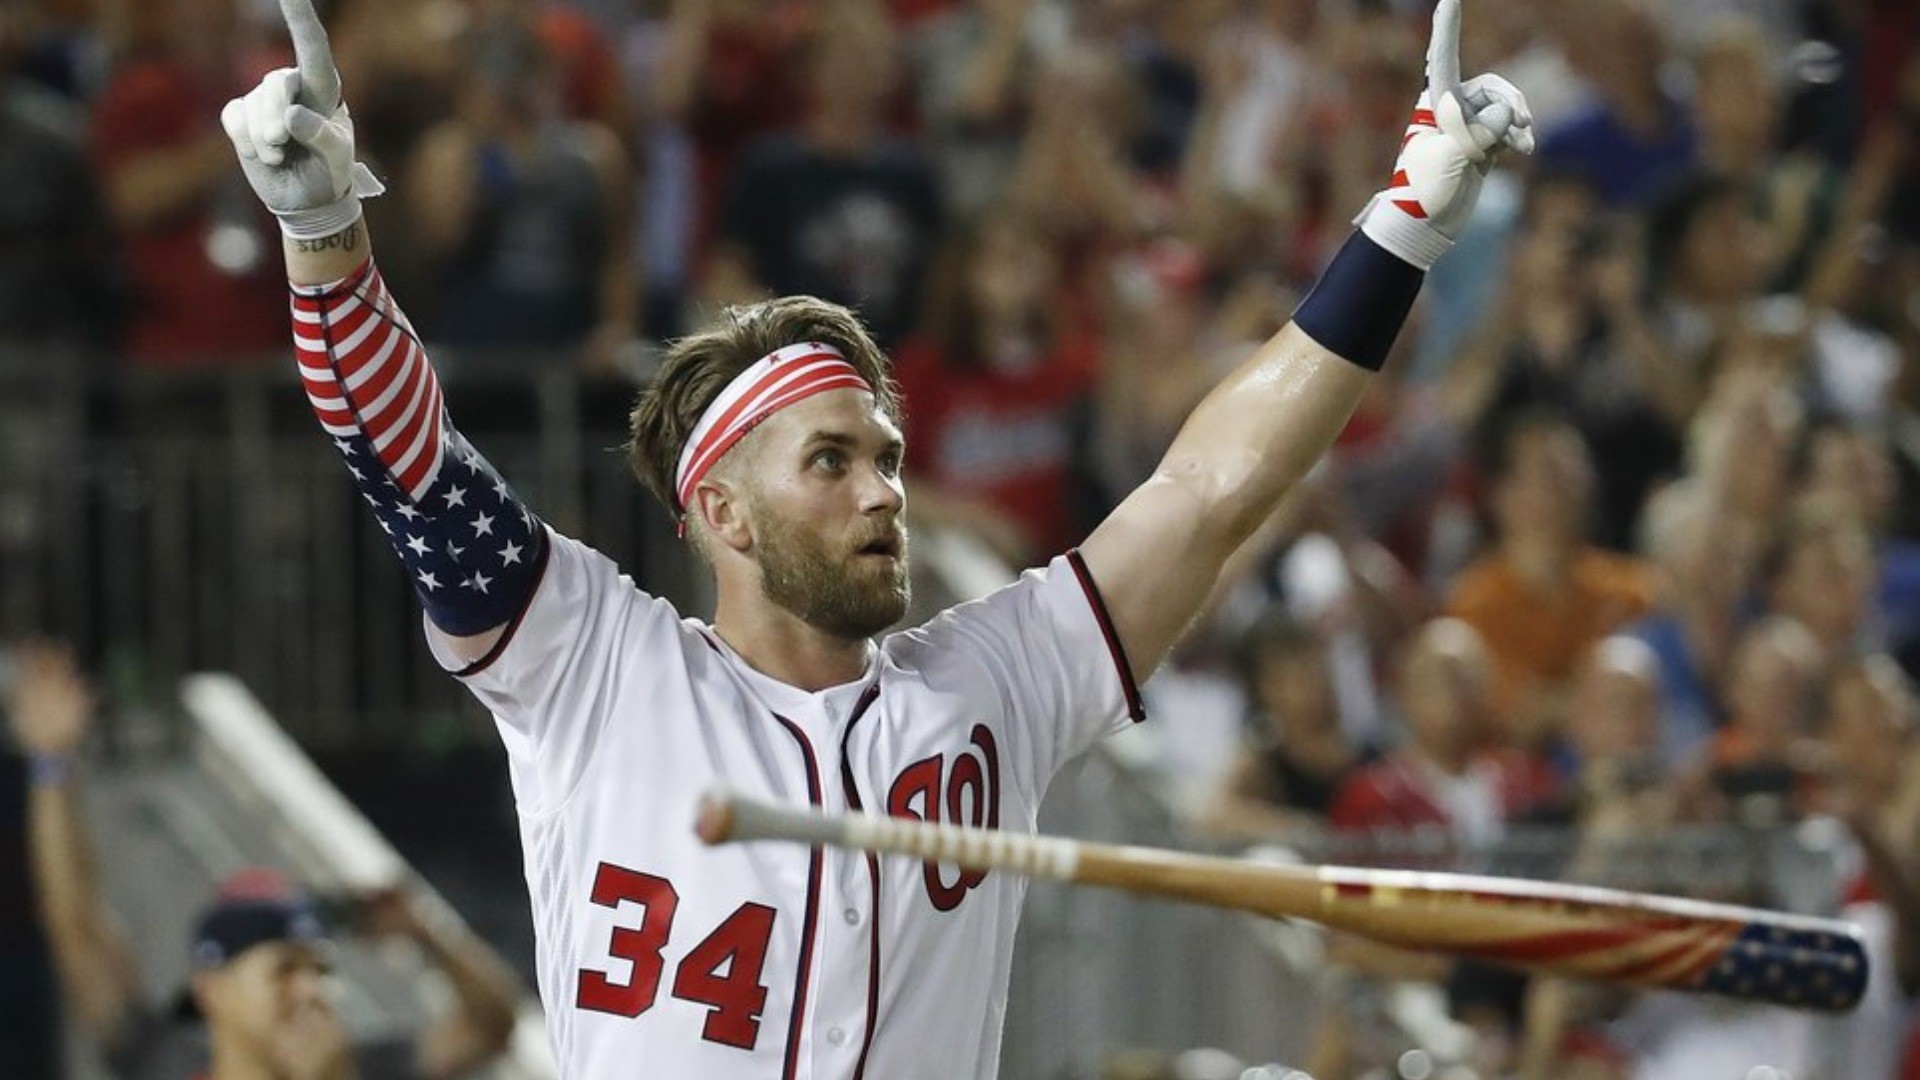 Bryce Harper might not get his $400 million contract, but it wouldn't